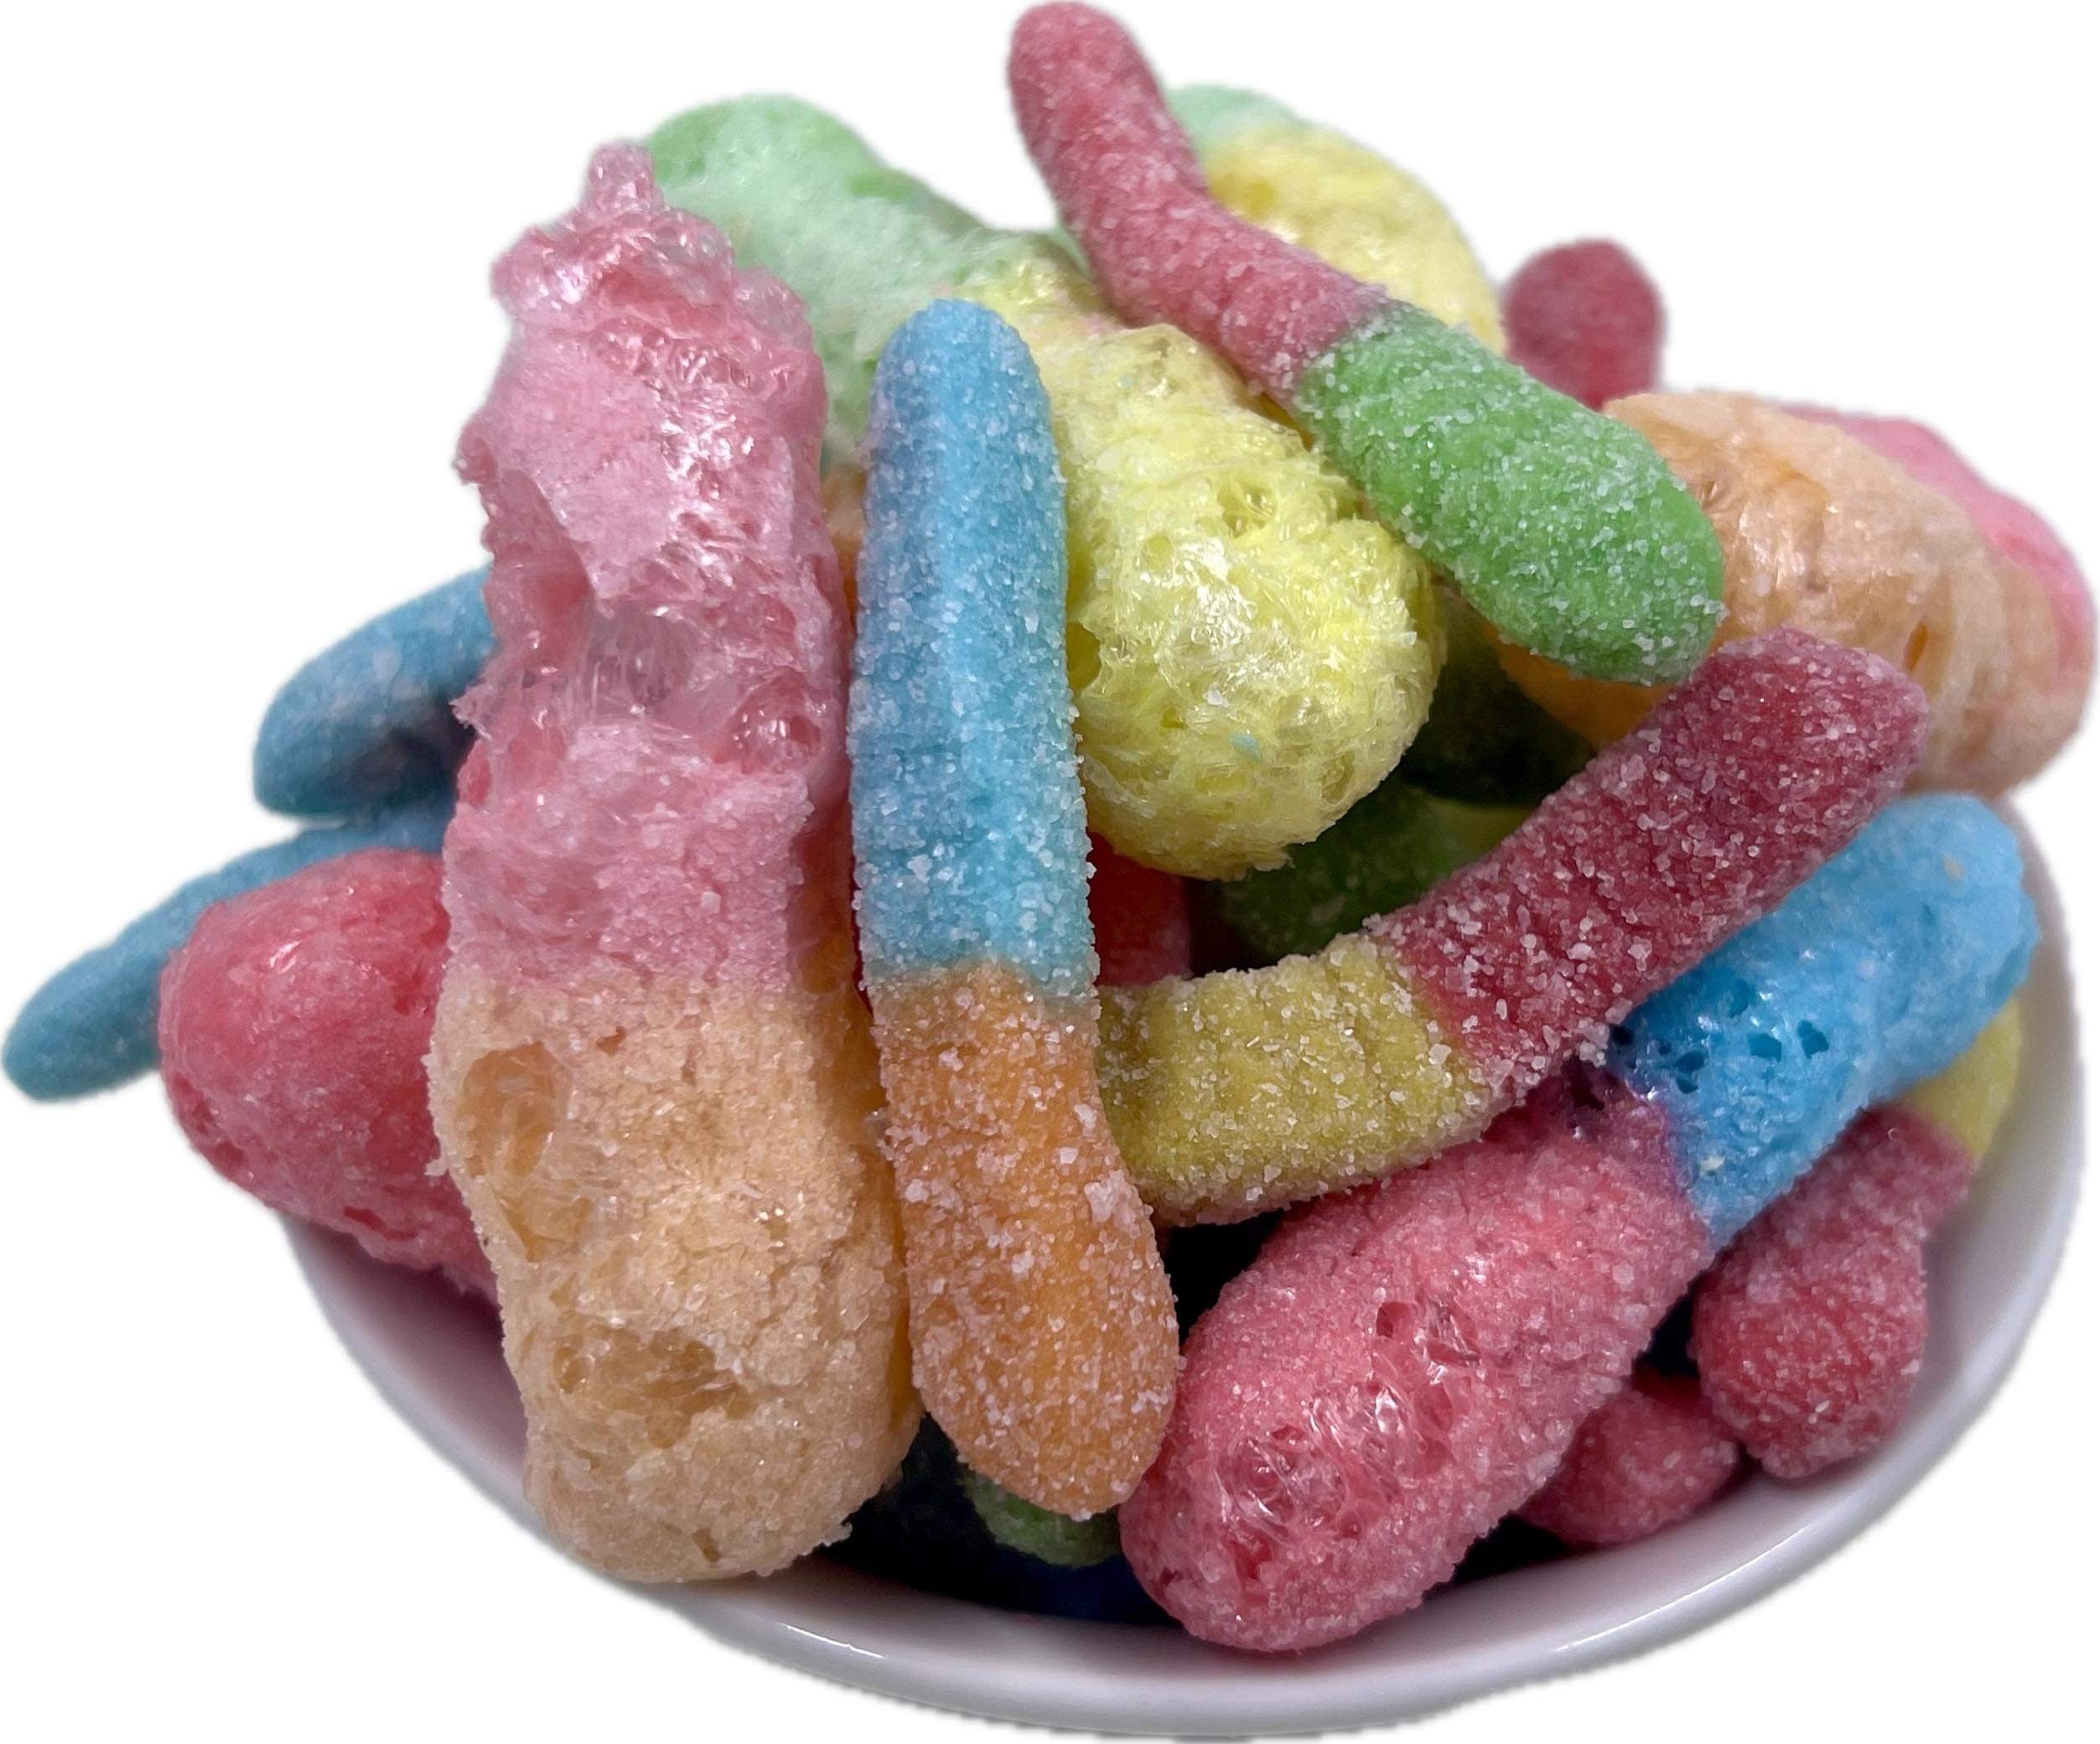 Freeze Dried Sour Worms